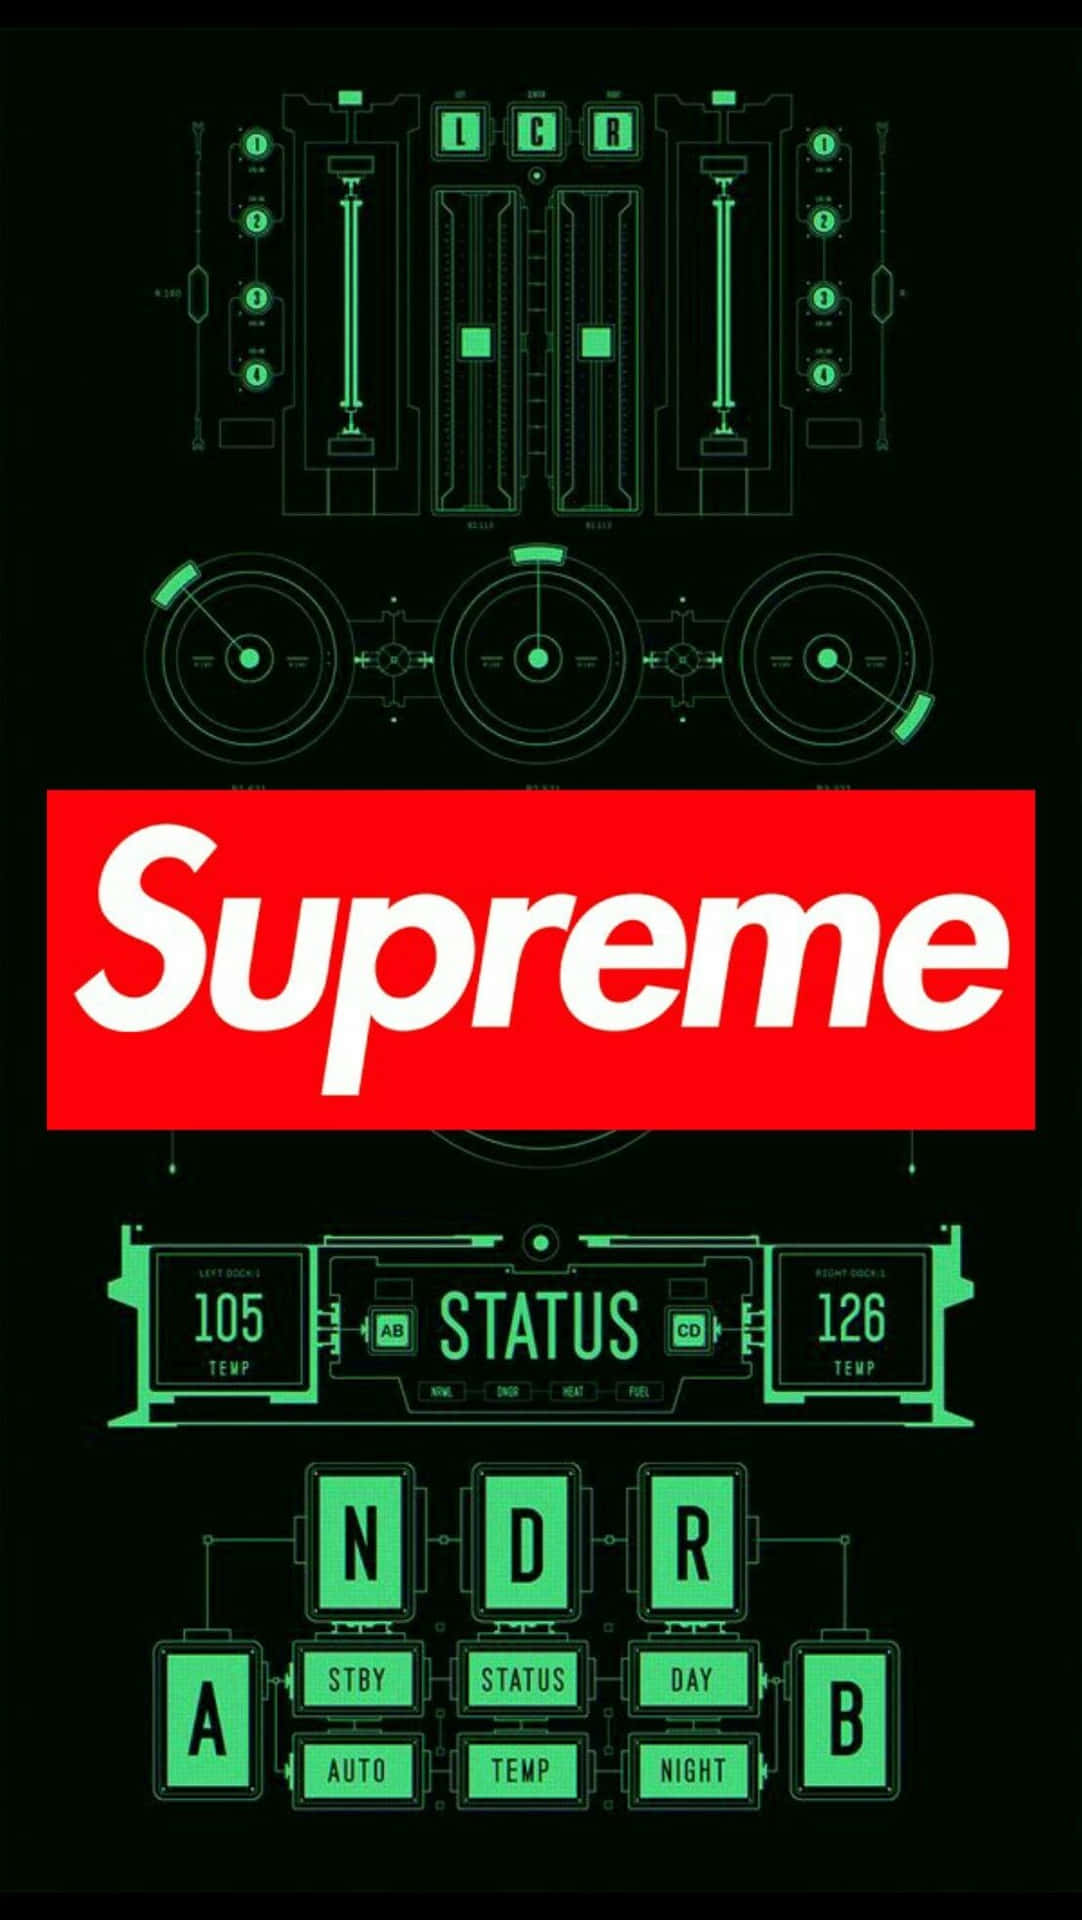 Get Supreme Style with this Stunning Iphone Wallpaper